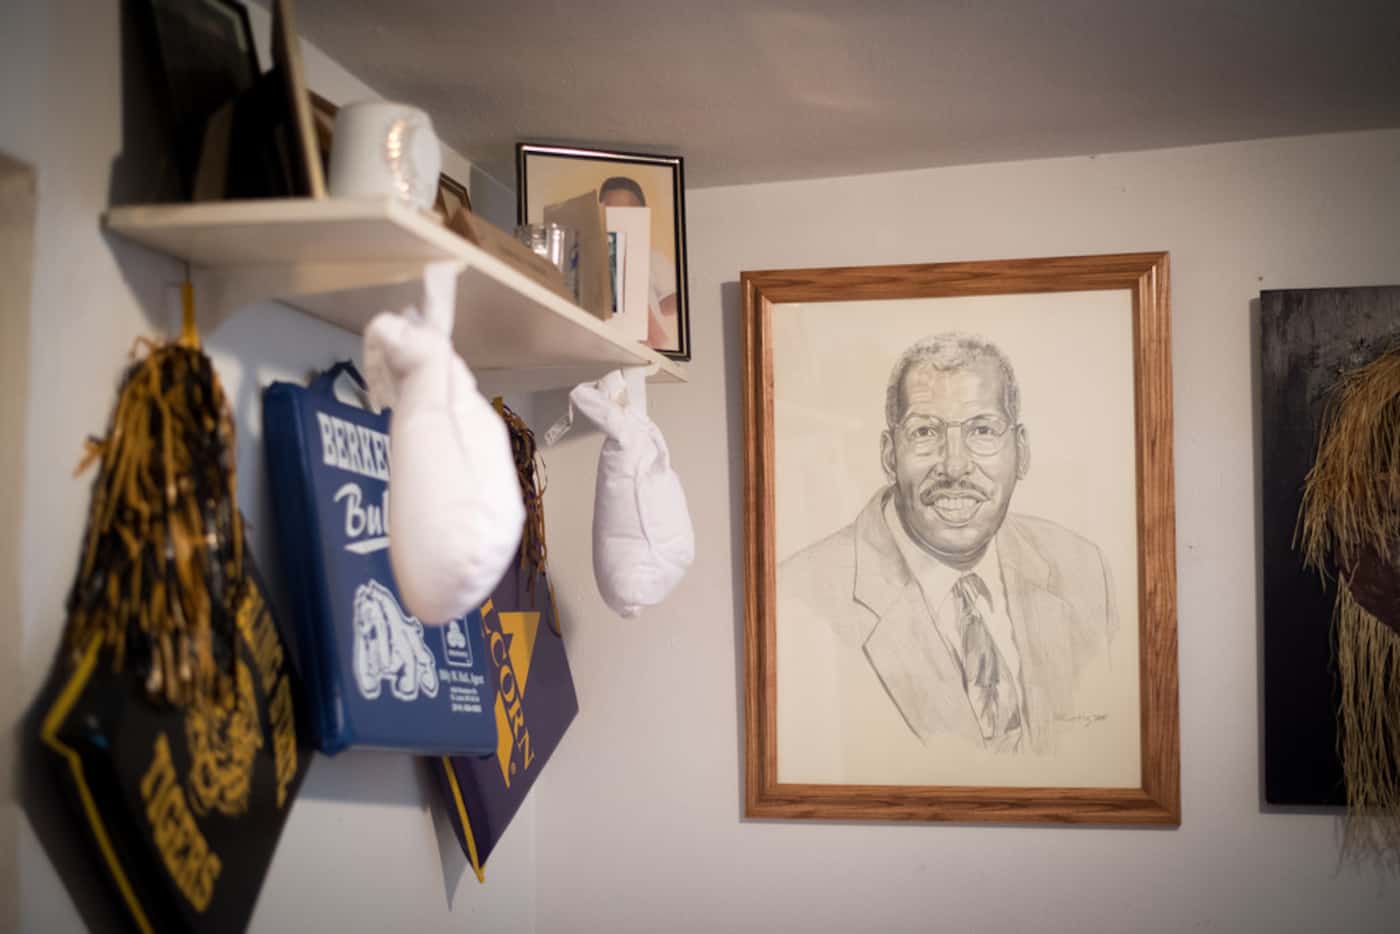 Pictures and artwork depicting Charles Edmond are seen at home of Ruth Edmond in University...